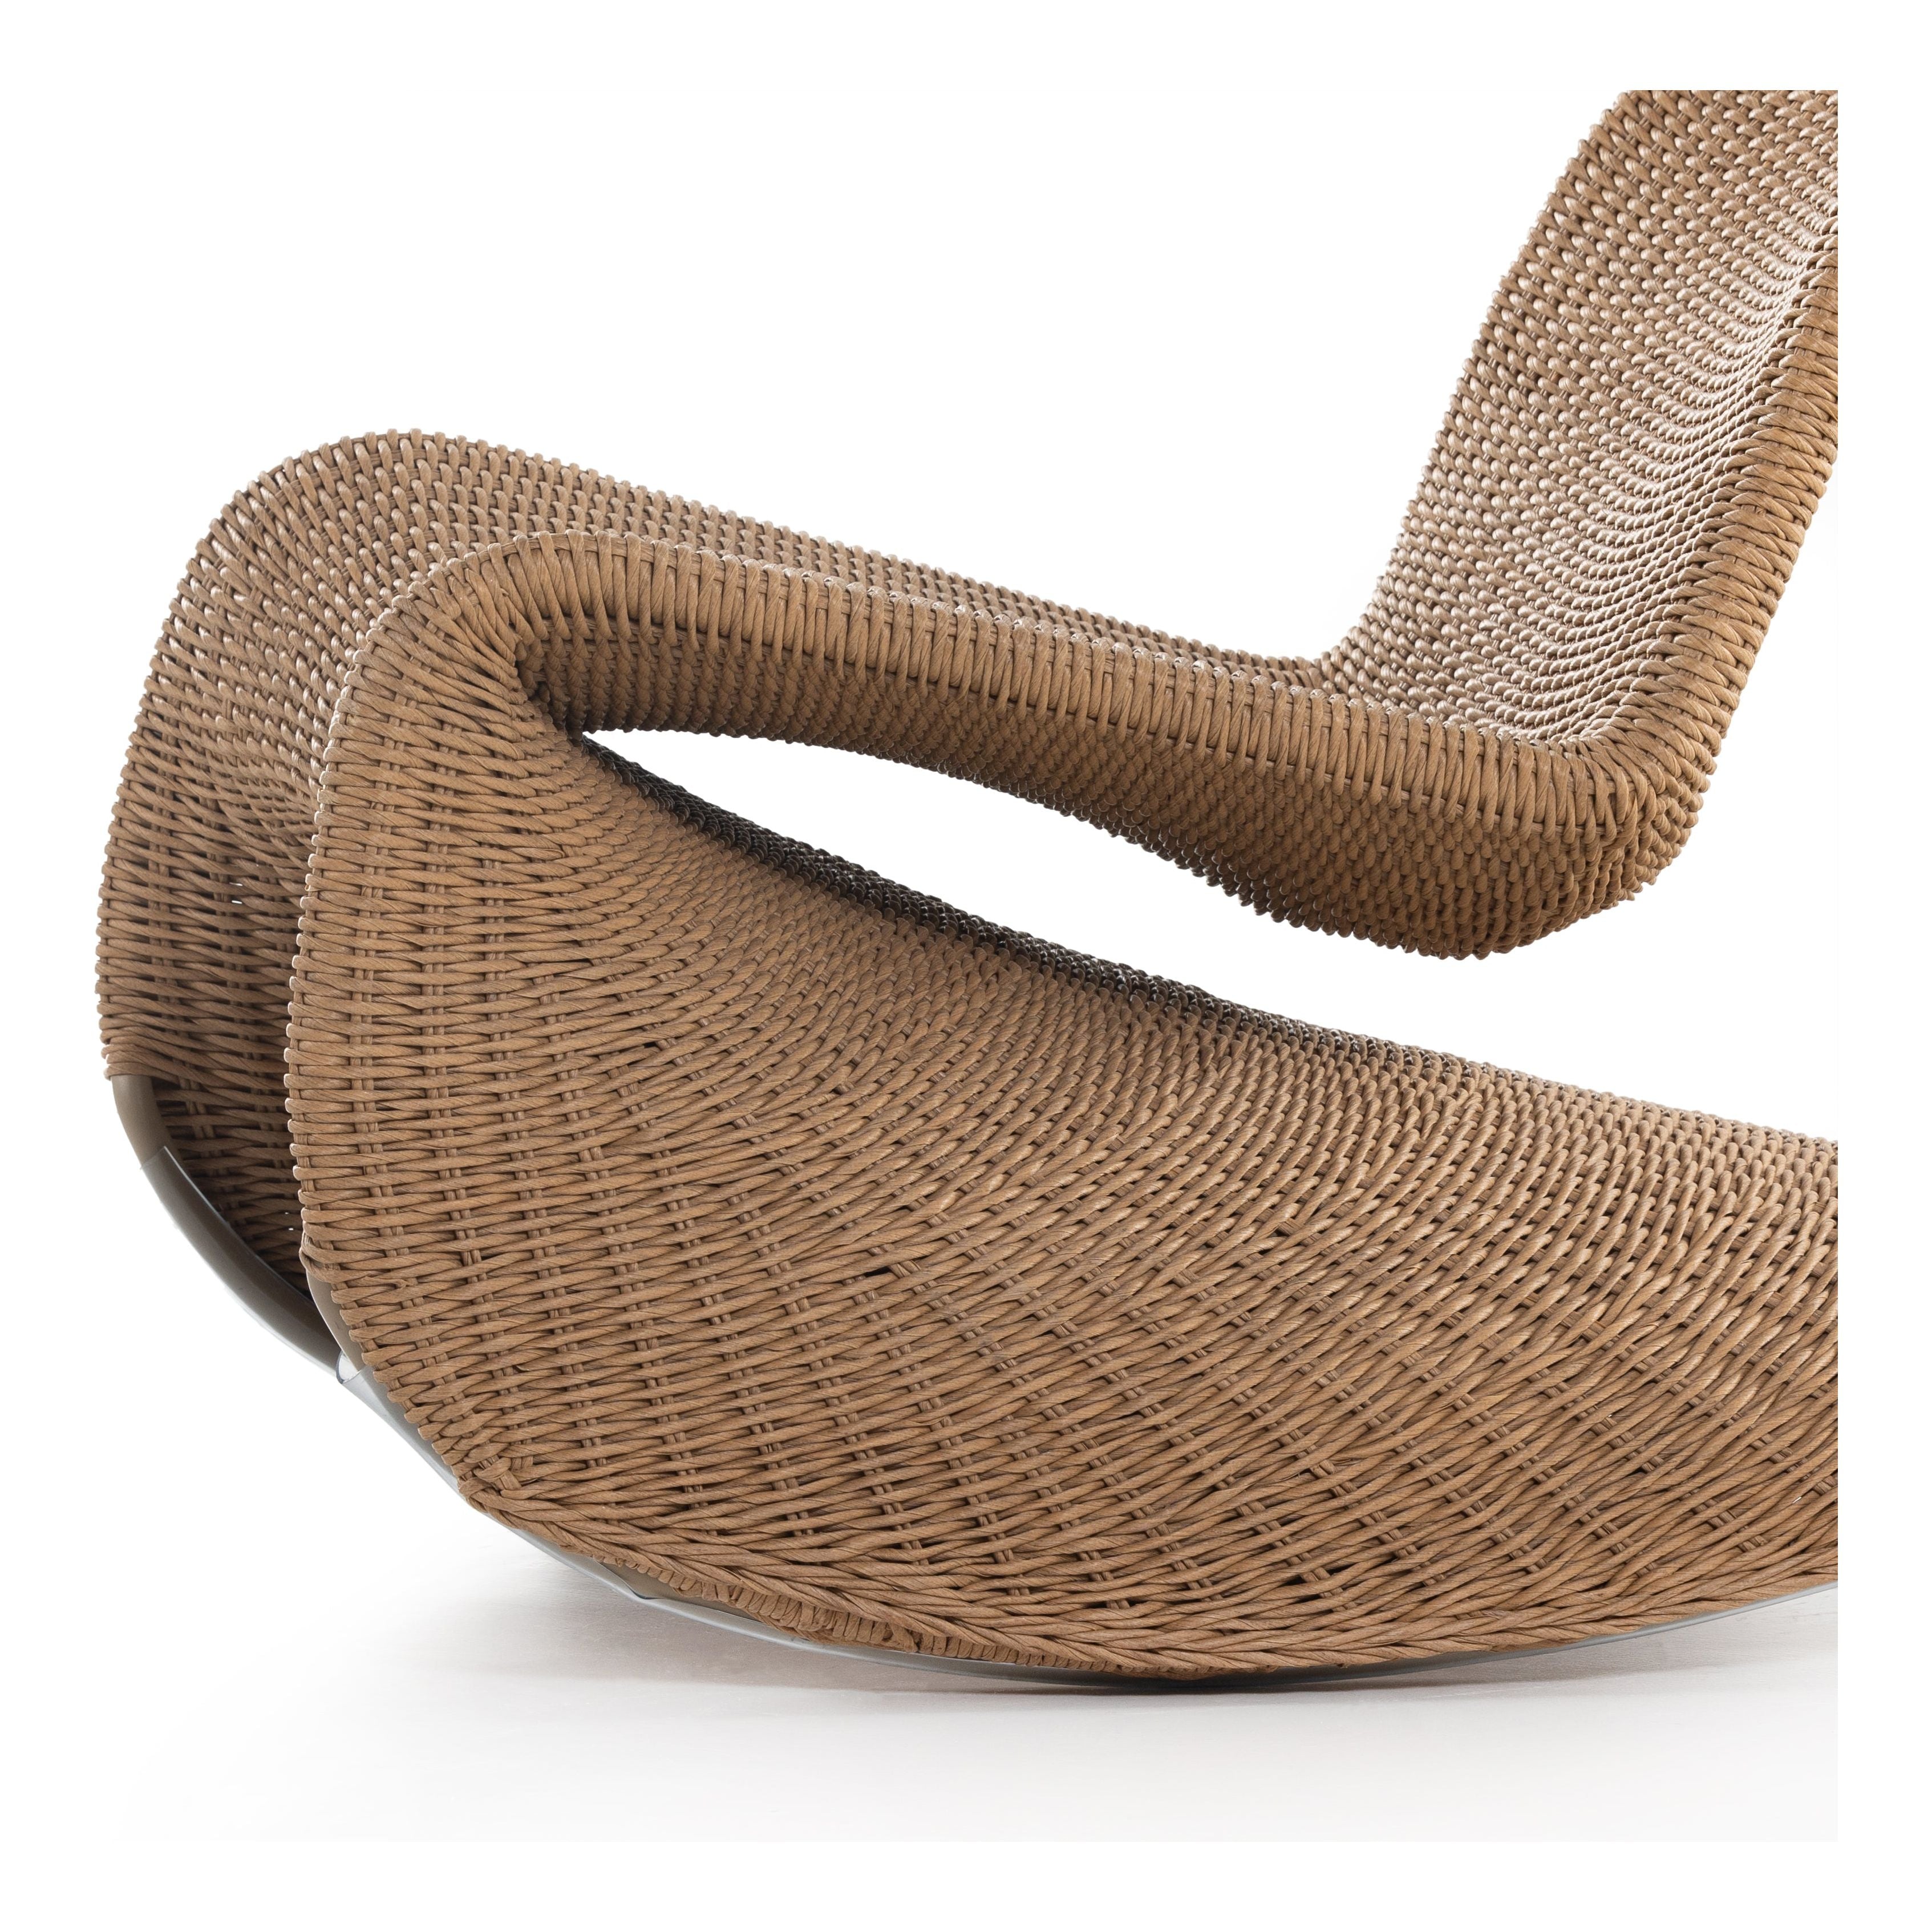 Based off a vintage shape, all-weather wicker seating brings dramatic curves to this statement-making rocking chair. Cover or store indoors during inclement weather and when not in use. Amethyst Home provides interior design, new construction, custom furniture, and area rugs in the Charlotte metro area.